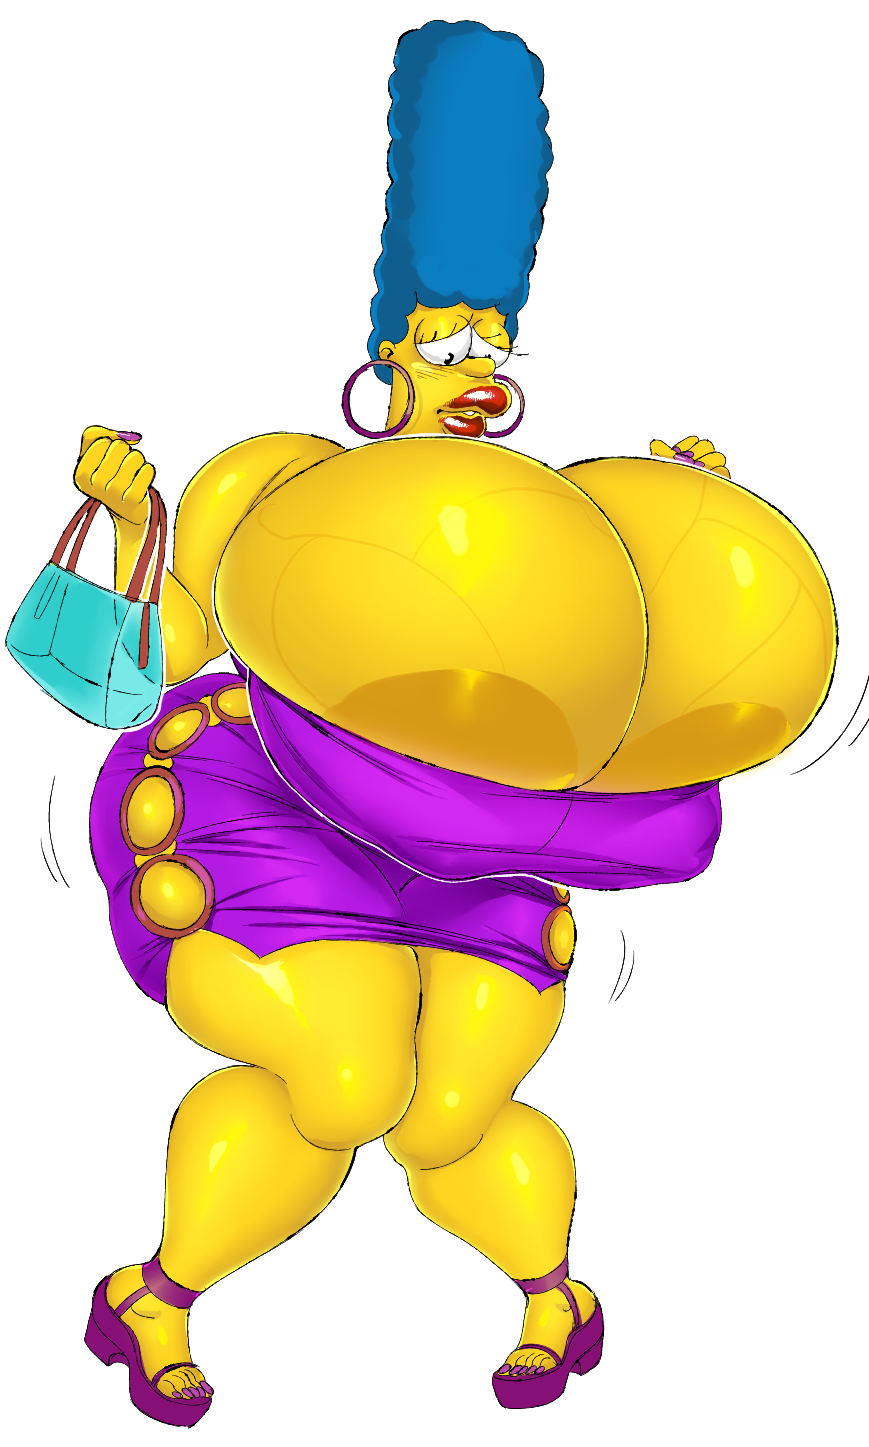 ffuffle:I saw people draw marge in all sorts of fucked up ways and I realized that